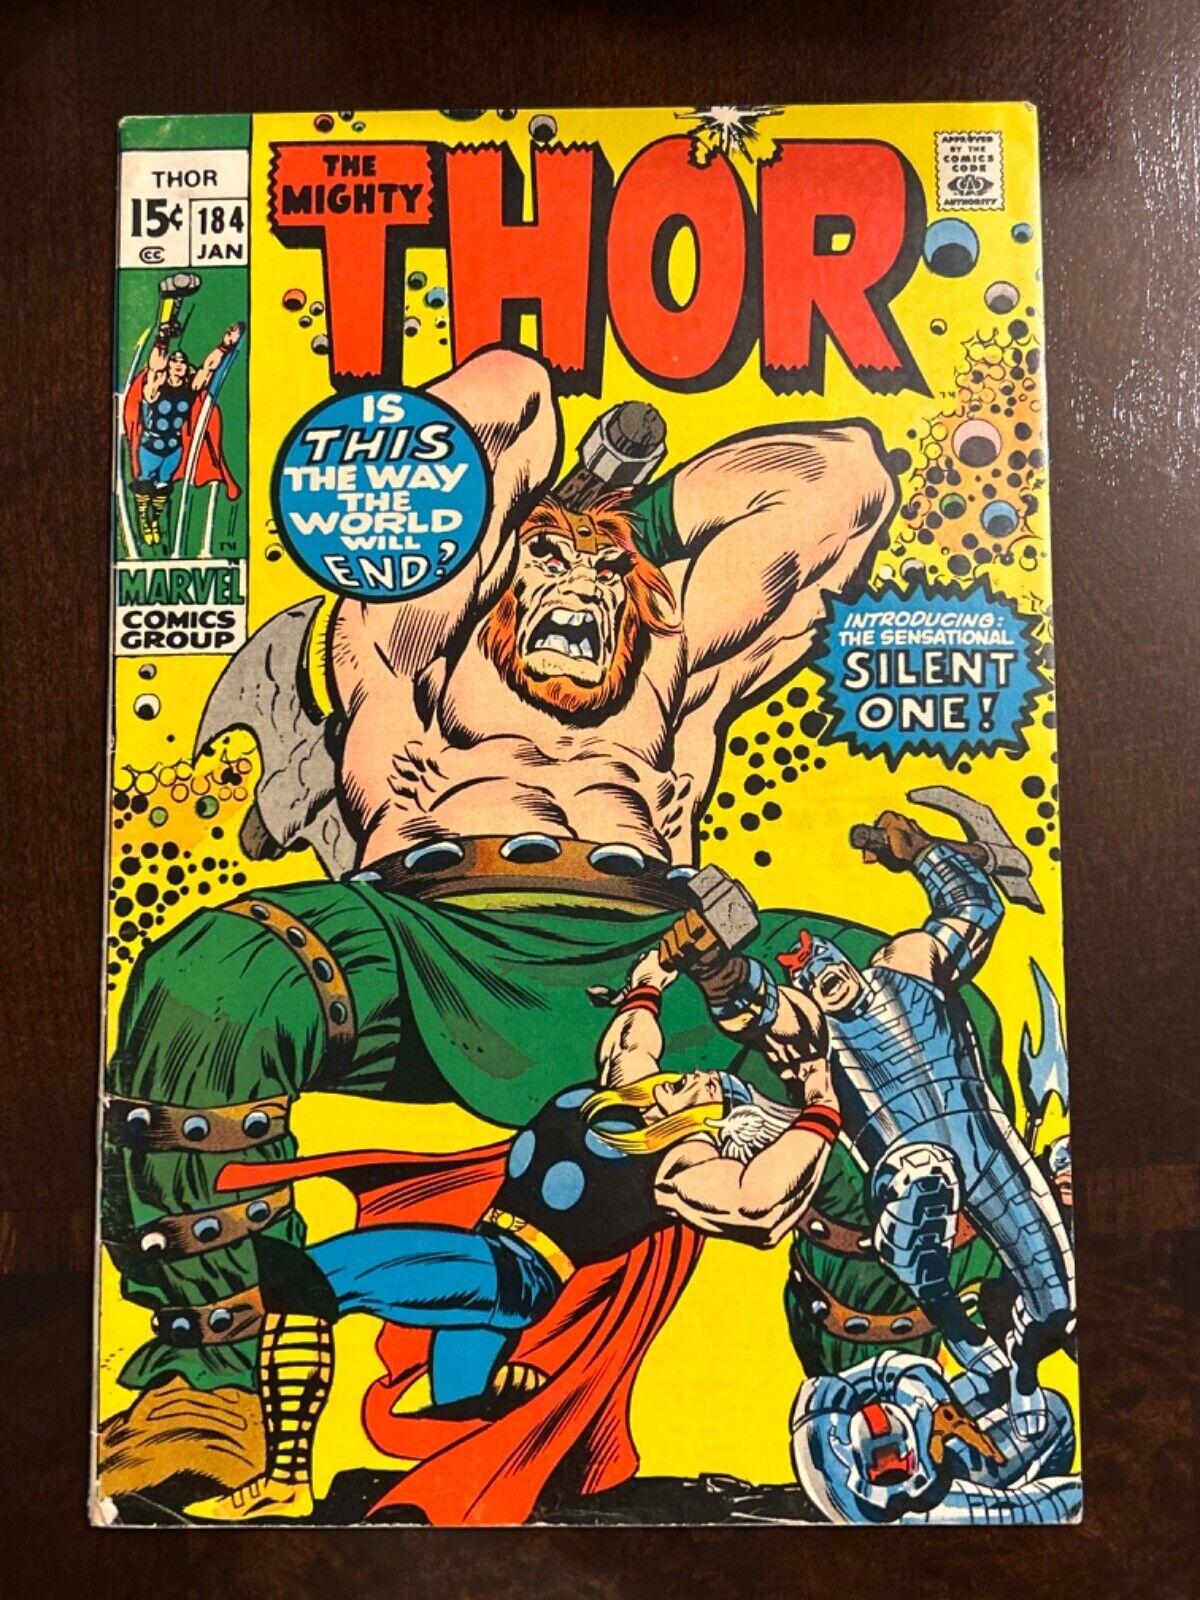 Thor #184 Vol. 1 (Marvel, 1971) Key 1st Appearance Of The Silent One, Mid-Grade